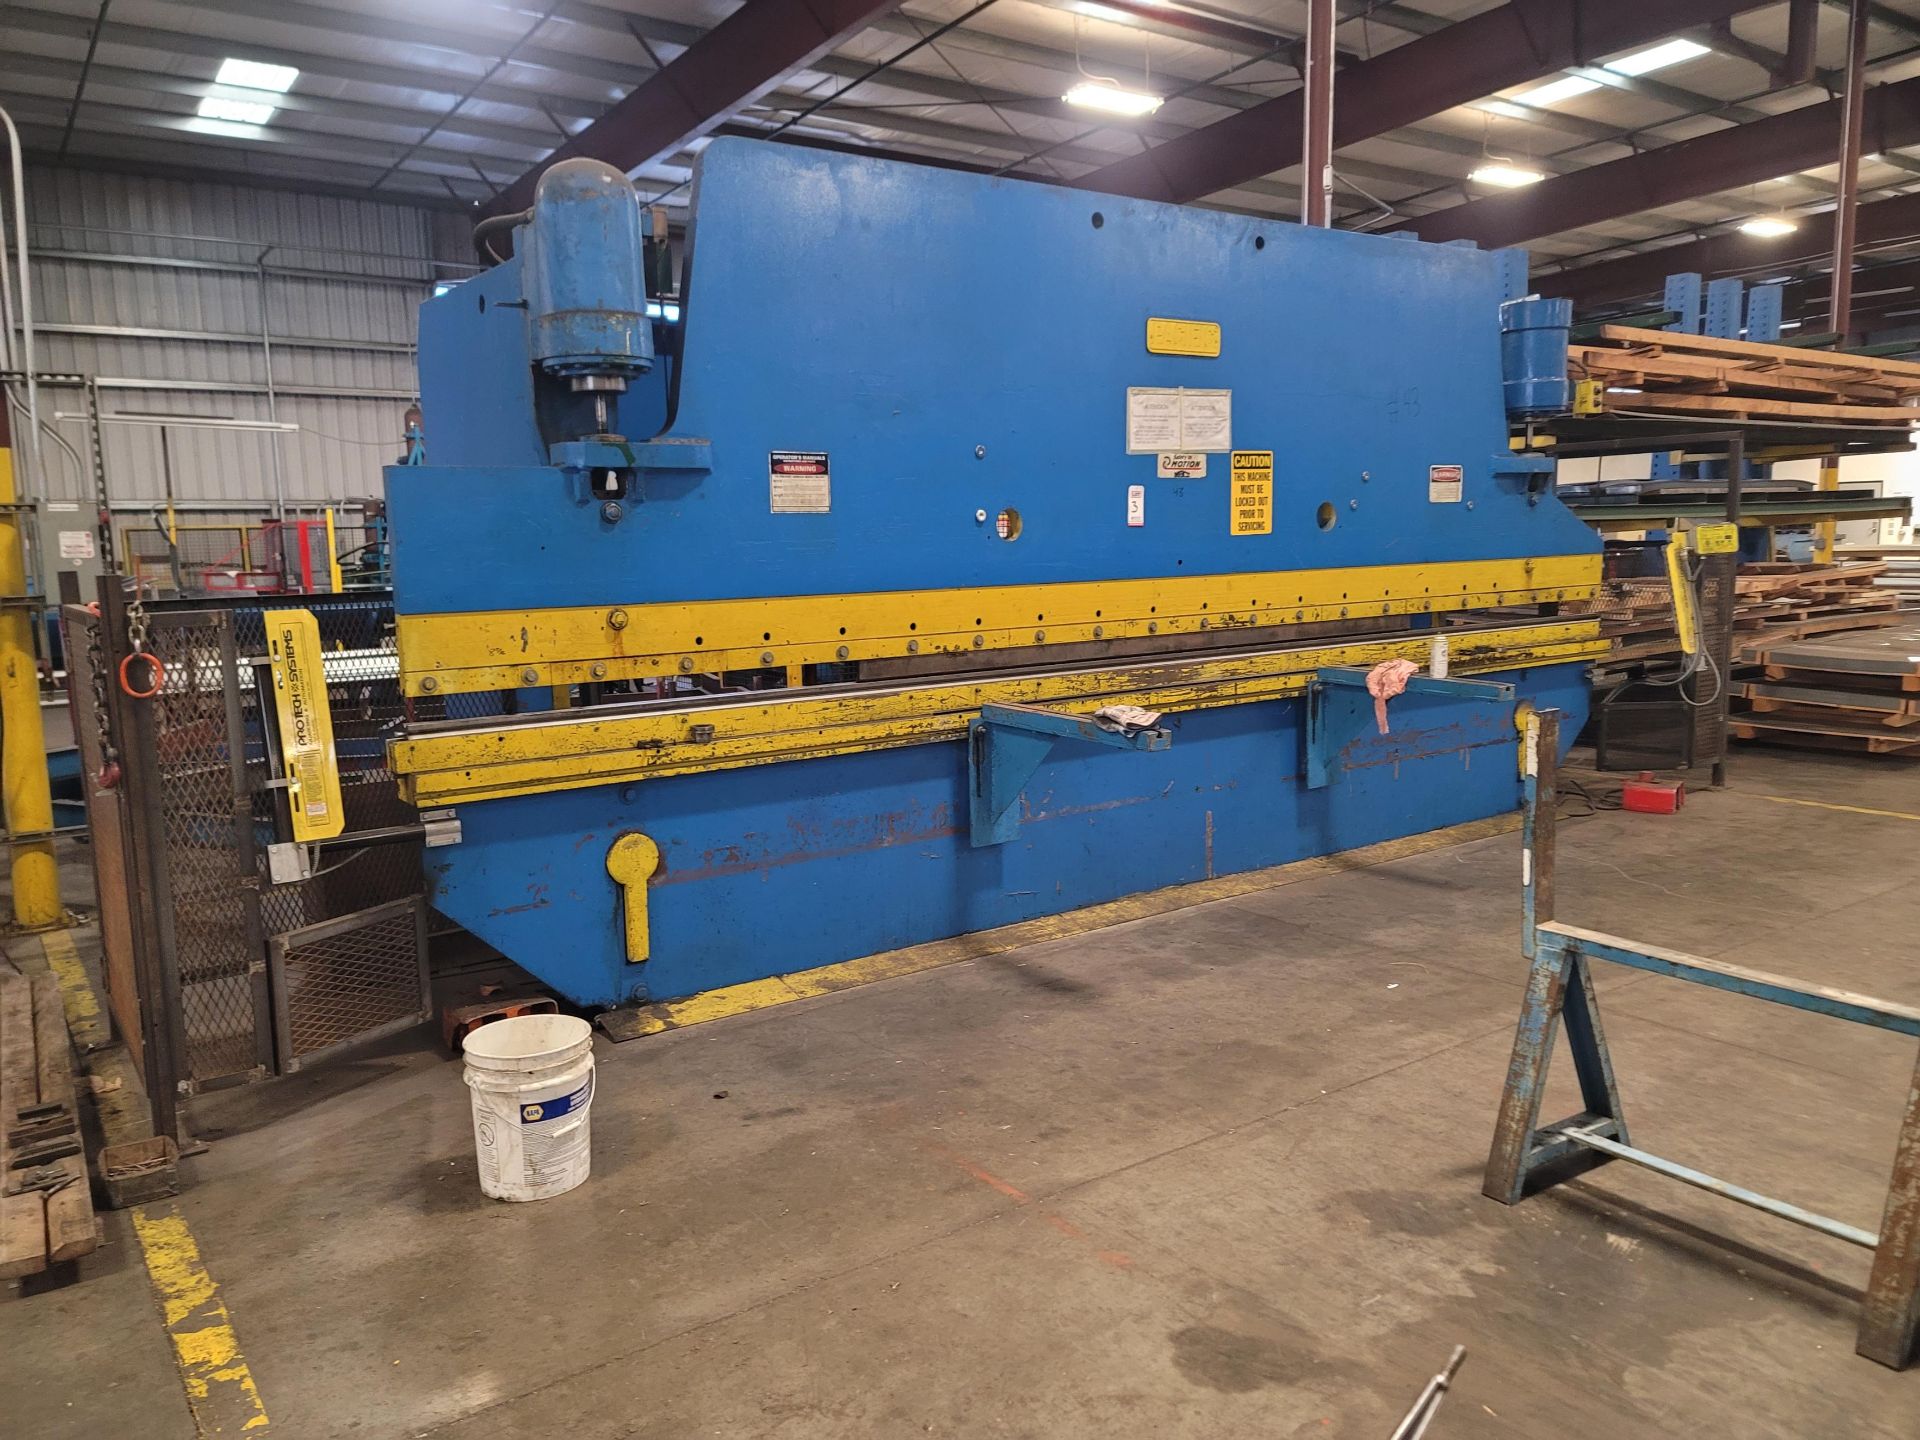 PACIFIC K175-21 PRESS BRAKE, 3/16" X 21', HYDRAULIC, PROTECH EAGLE EYE GUARDING SYSTEM, S/N 8902 - Image 2 of 12